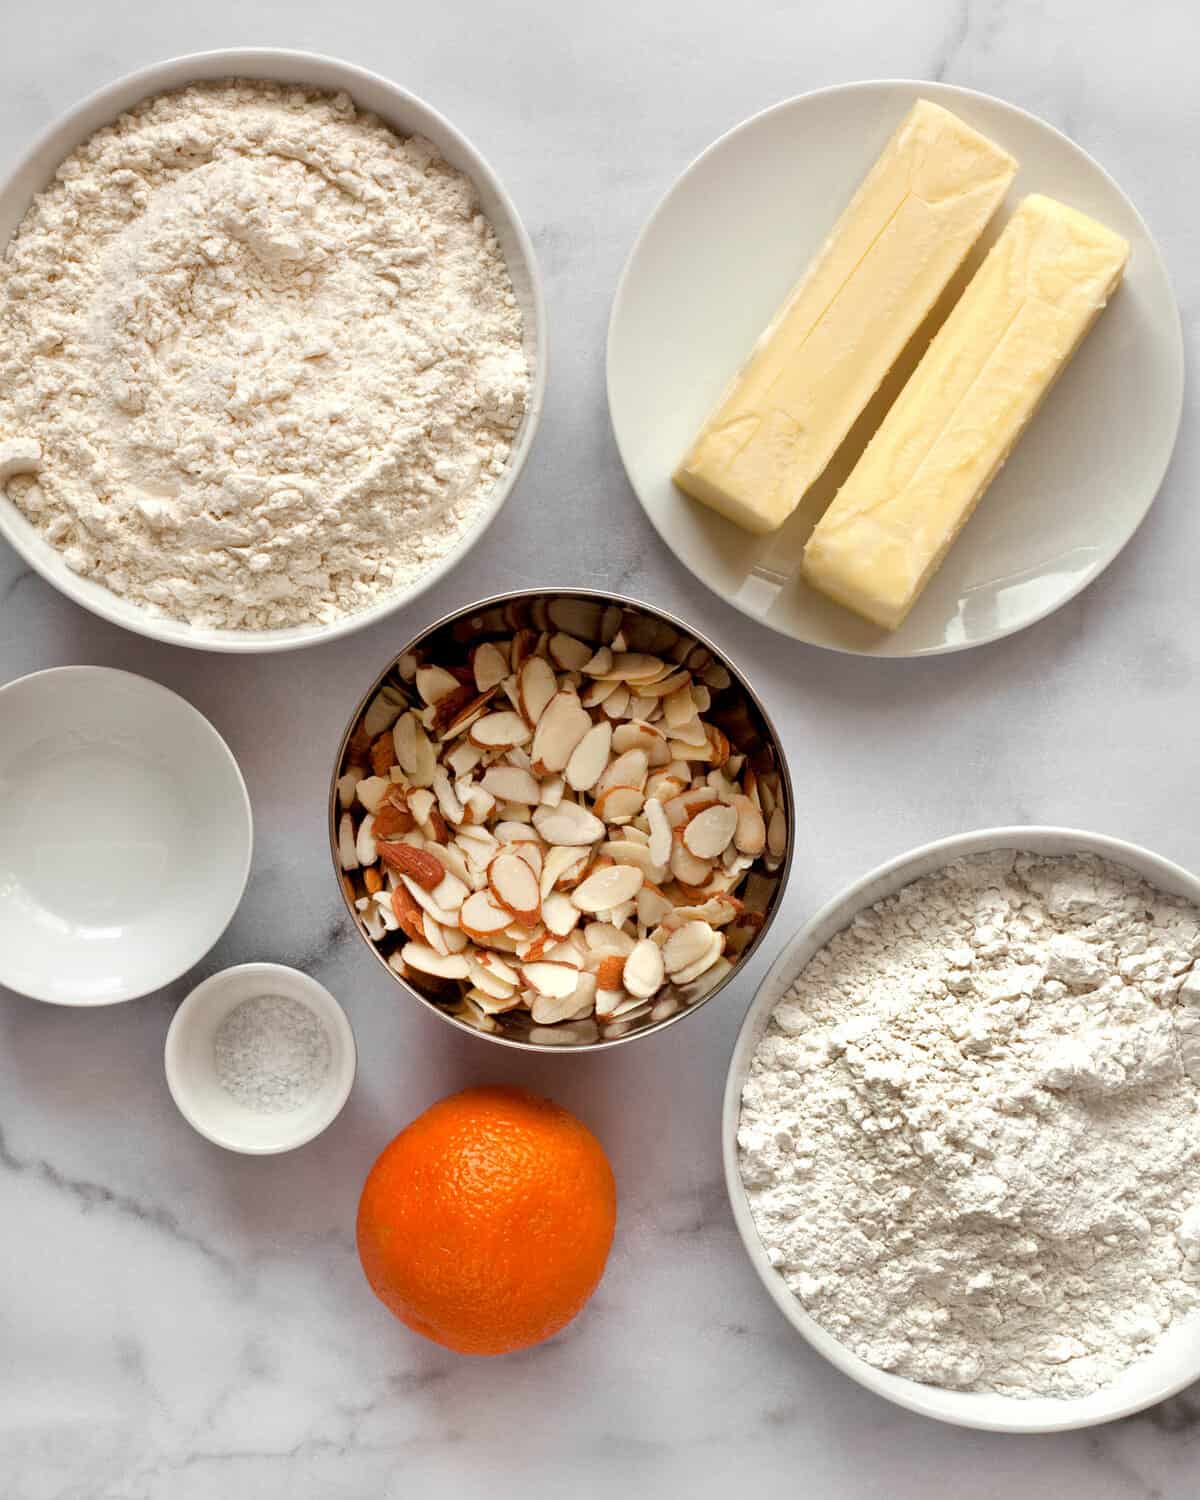 Ingredients including, flour, butter, powdered sugar, almonds, almond extract, and orange.